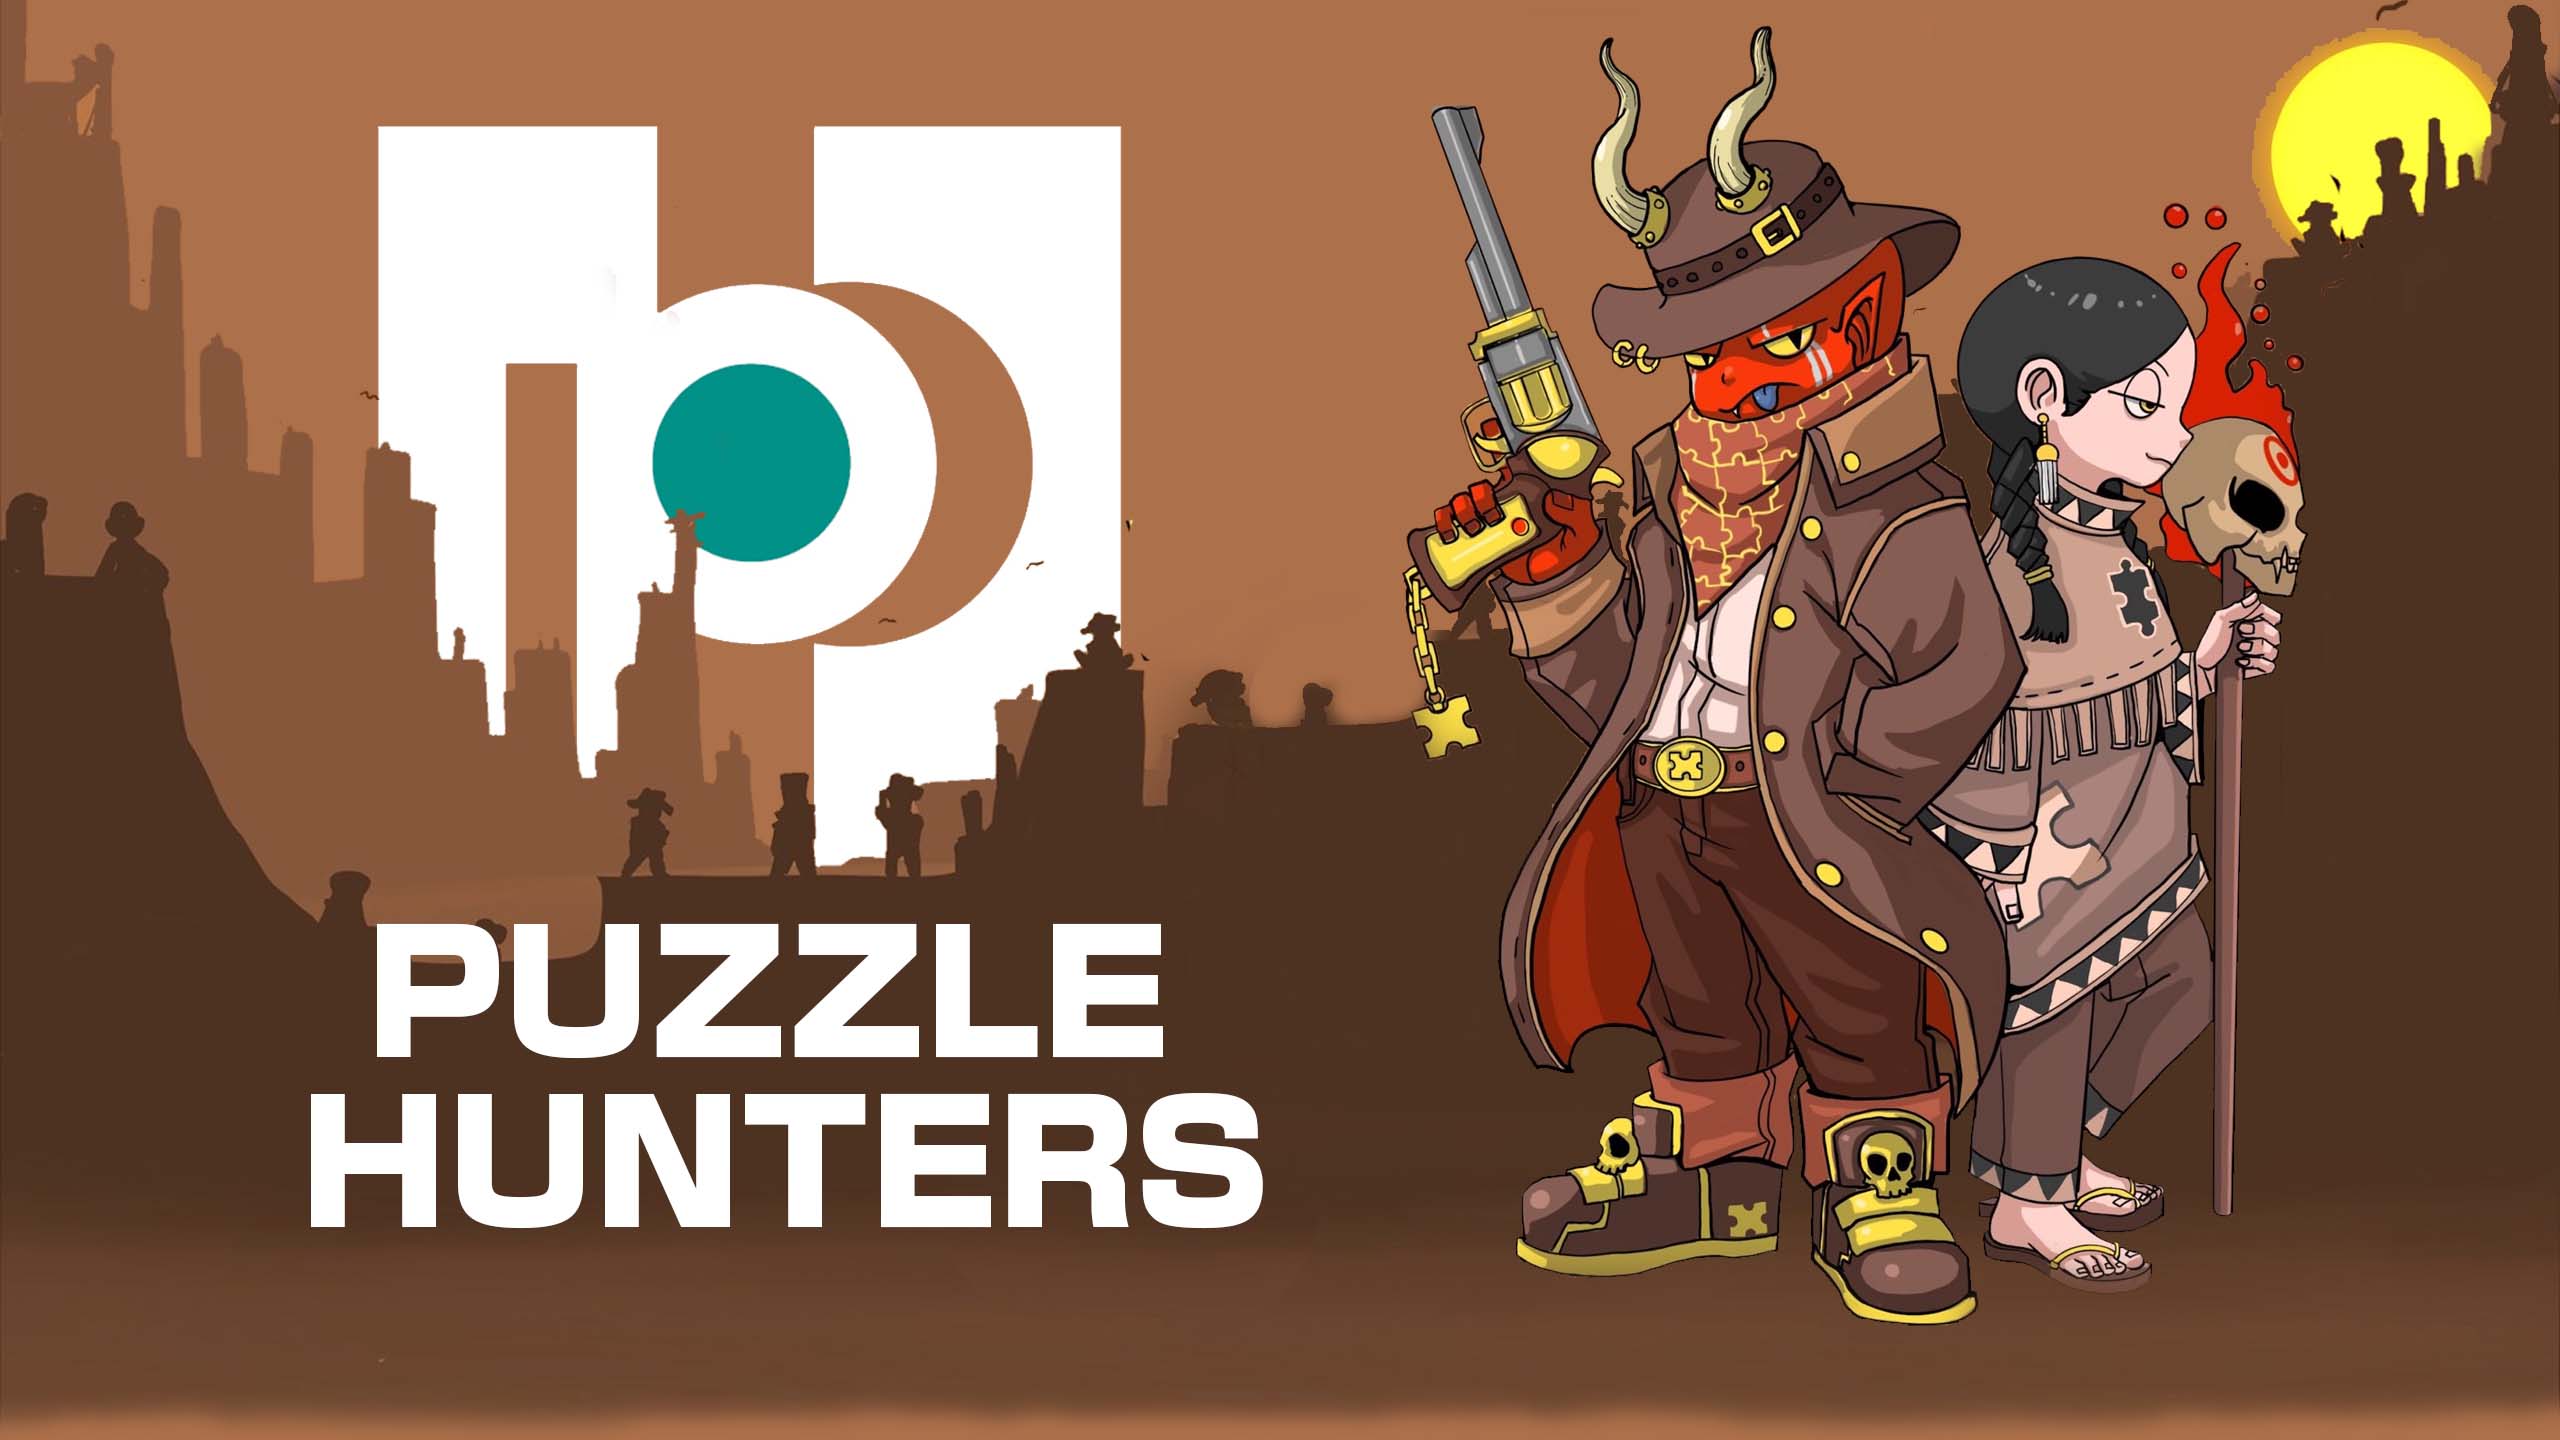 Puzzle Hunters v0: Puzzles